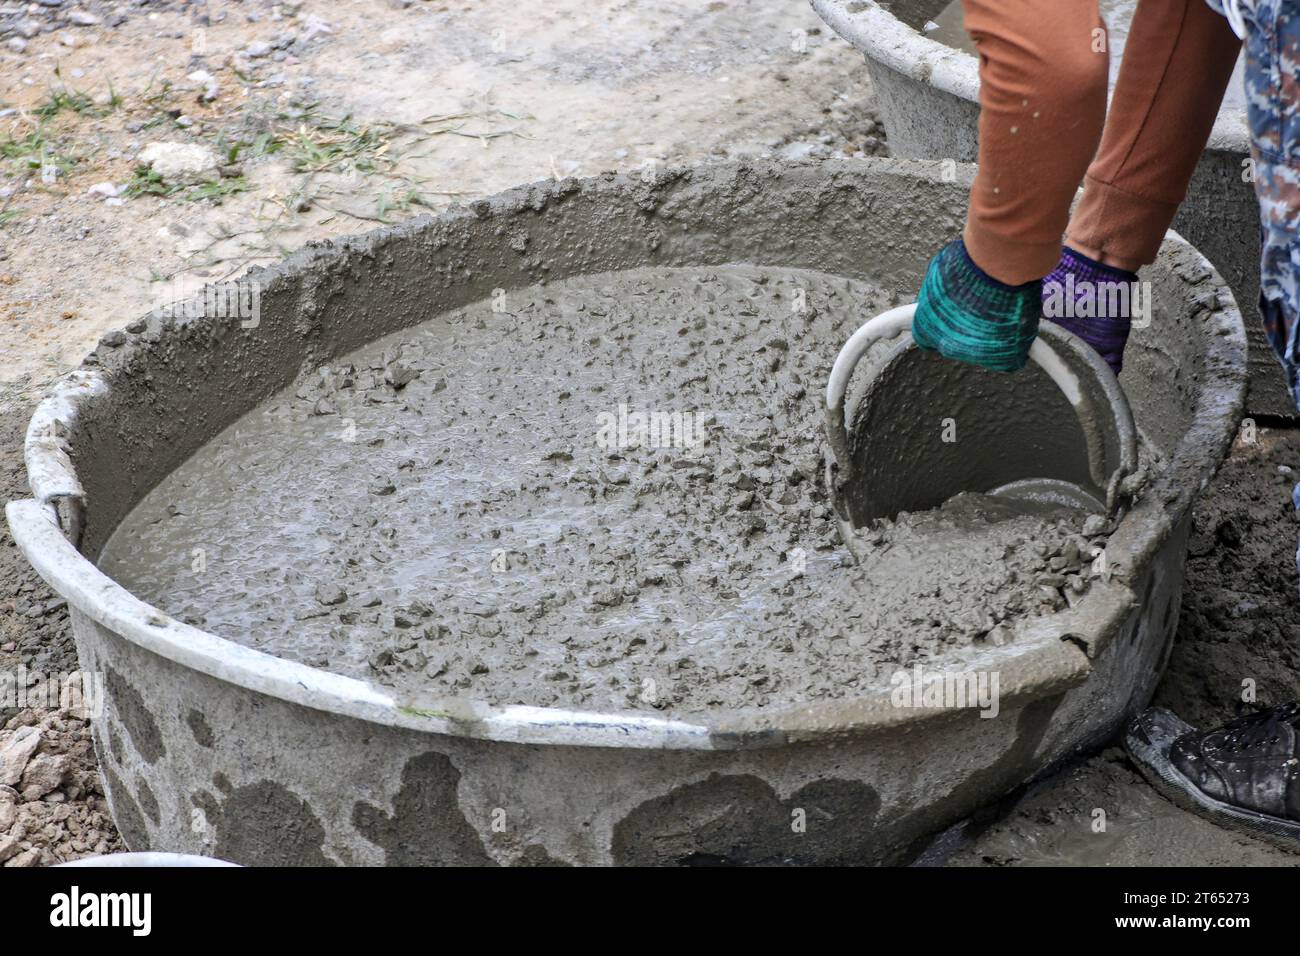 A worker uses a bucket to scoop ready-mixed concrete in construction work on site. Stock Photo